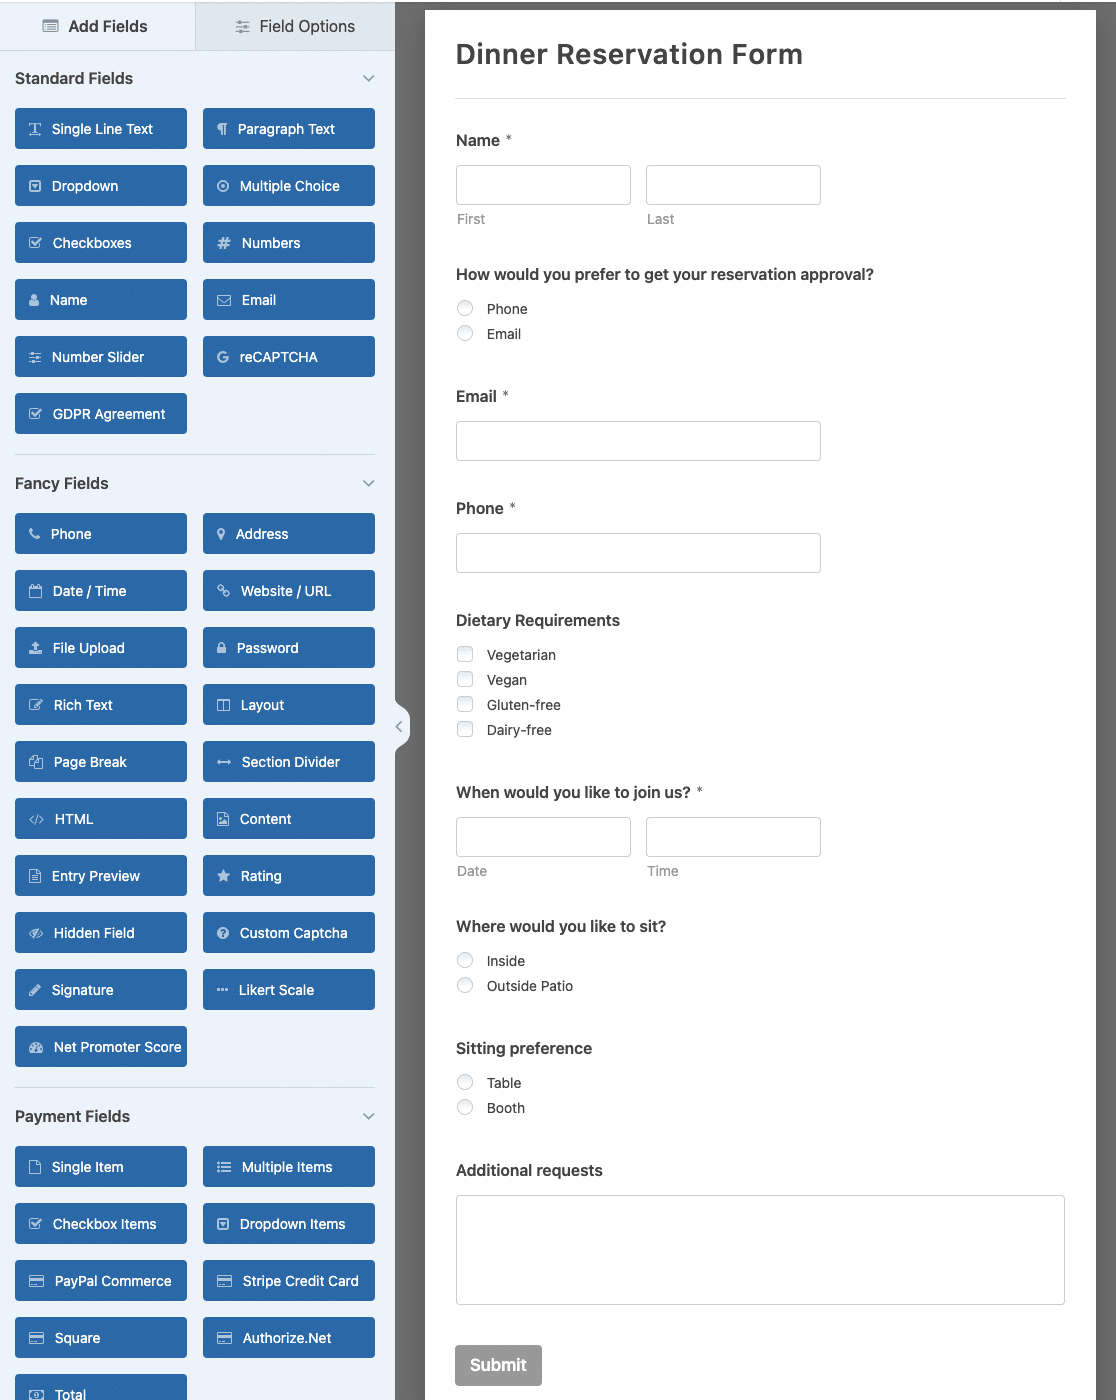 The Dinner Reservation Form template in the form builder